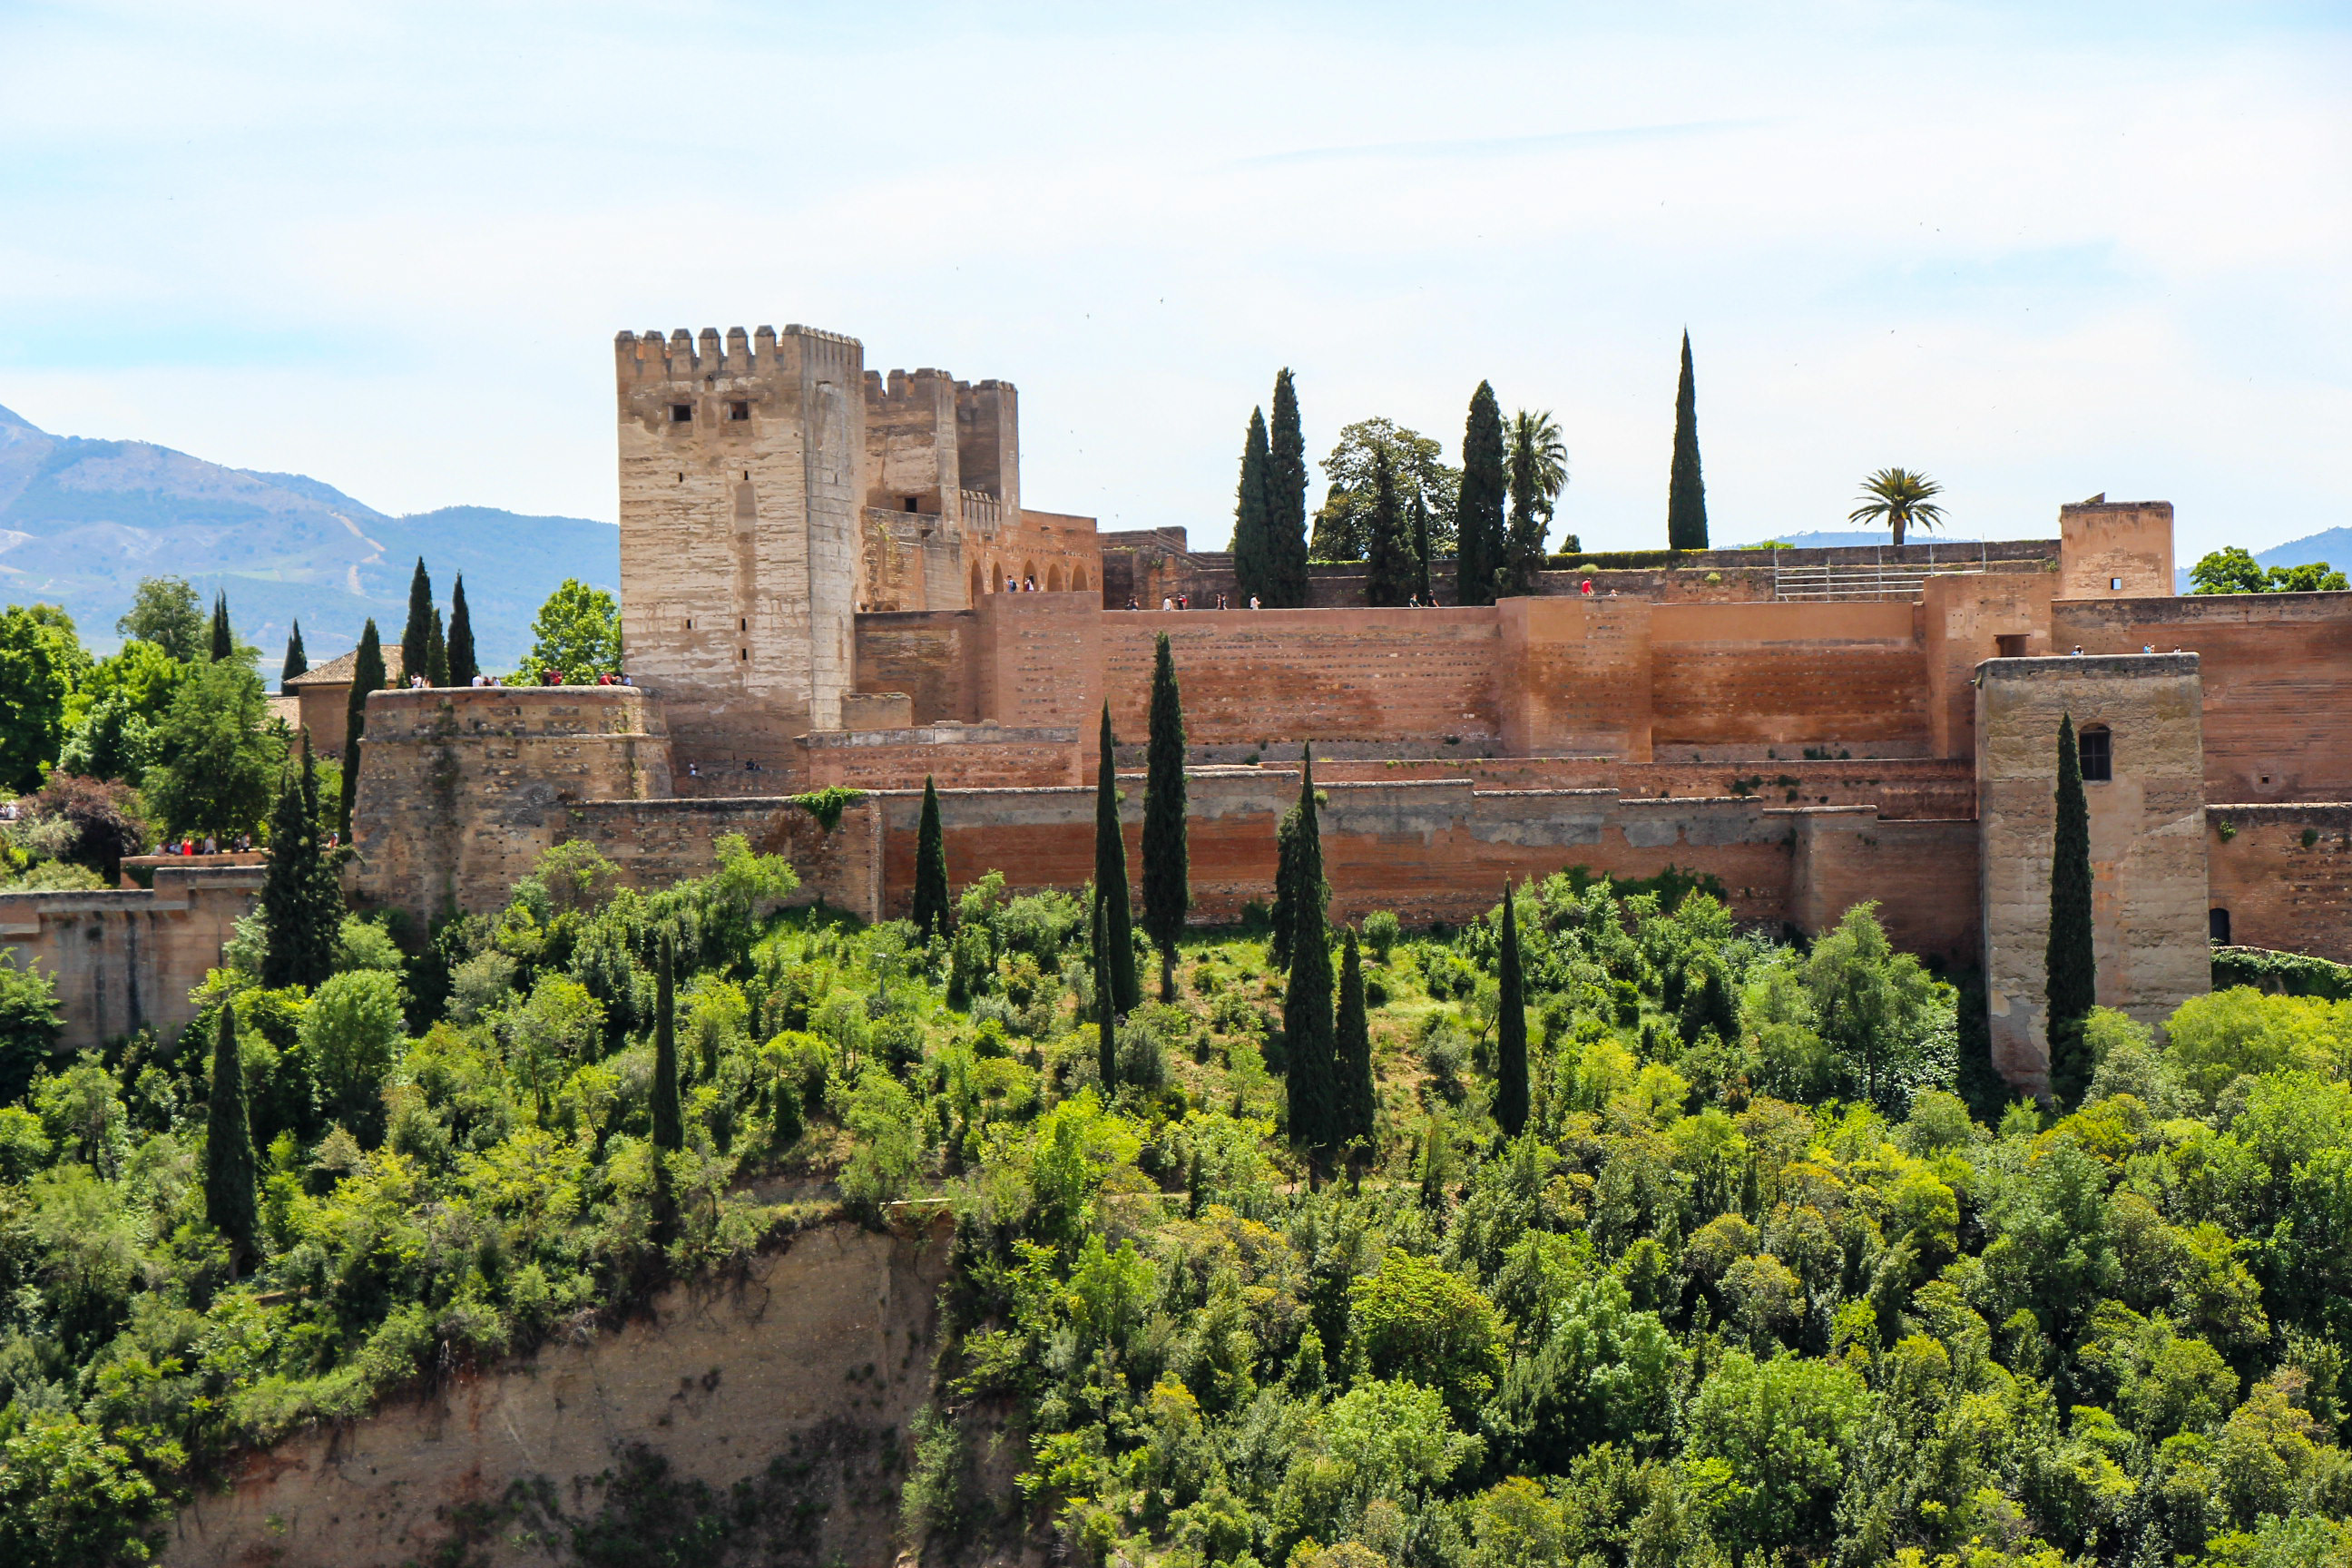 The Alhambra is a masterpiece of Islamic Architecture, It sits a t the top of the verdant Darro Valley and looks out over the old Arabic Quarter of the city. The Alhambra became UNESCO world heritage site in 1984 it is considered one of the ten wonders of the world.